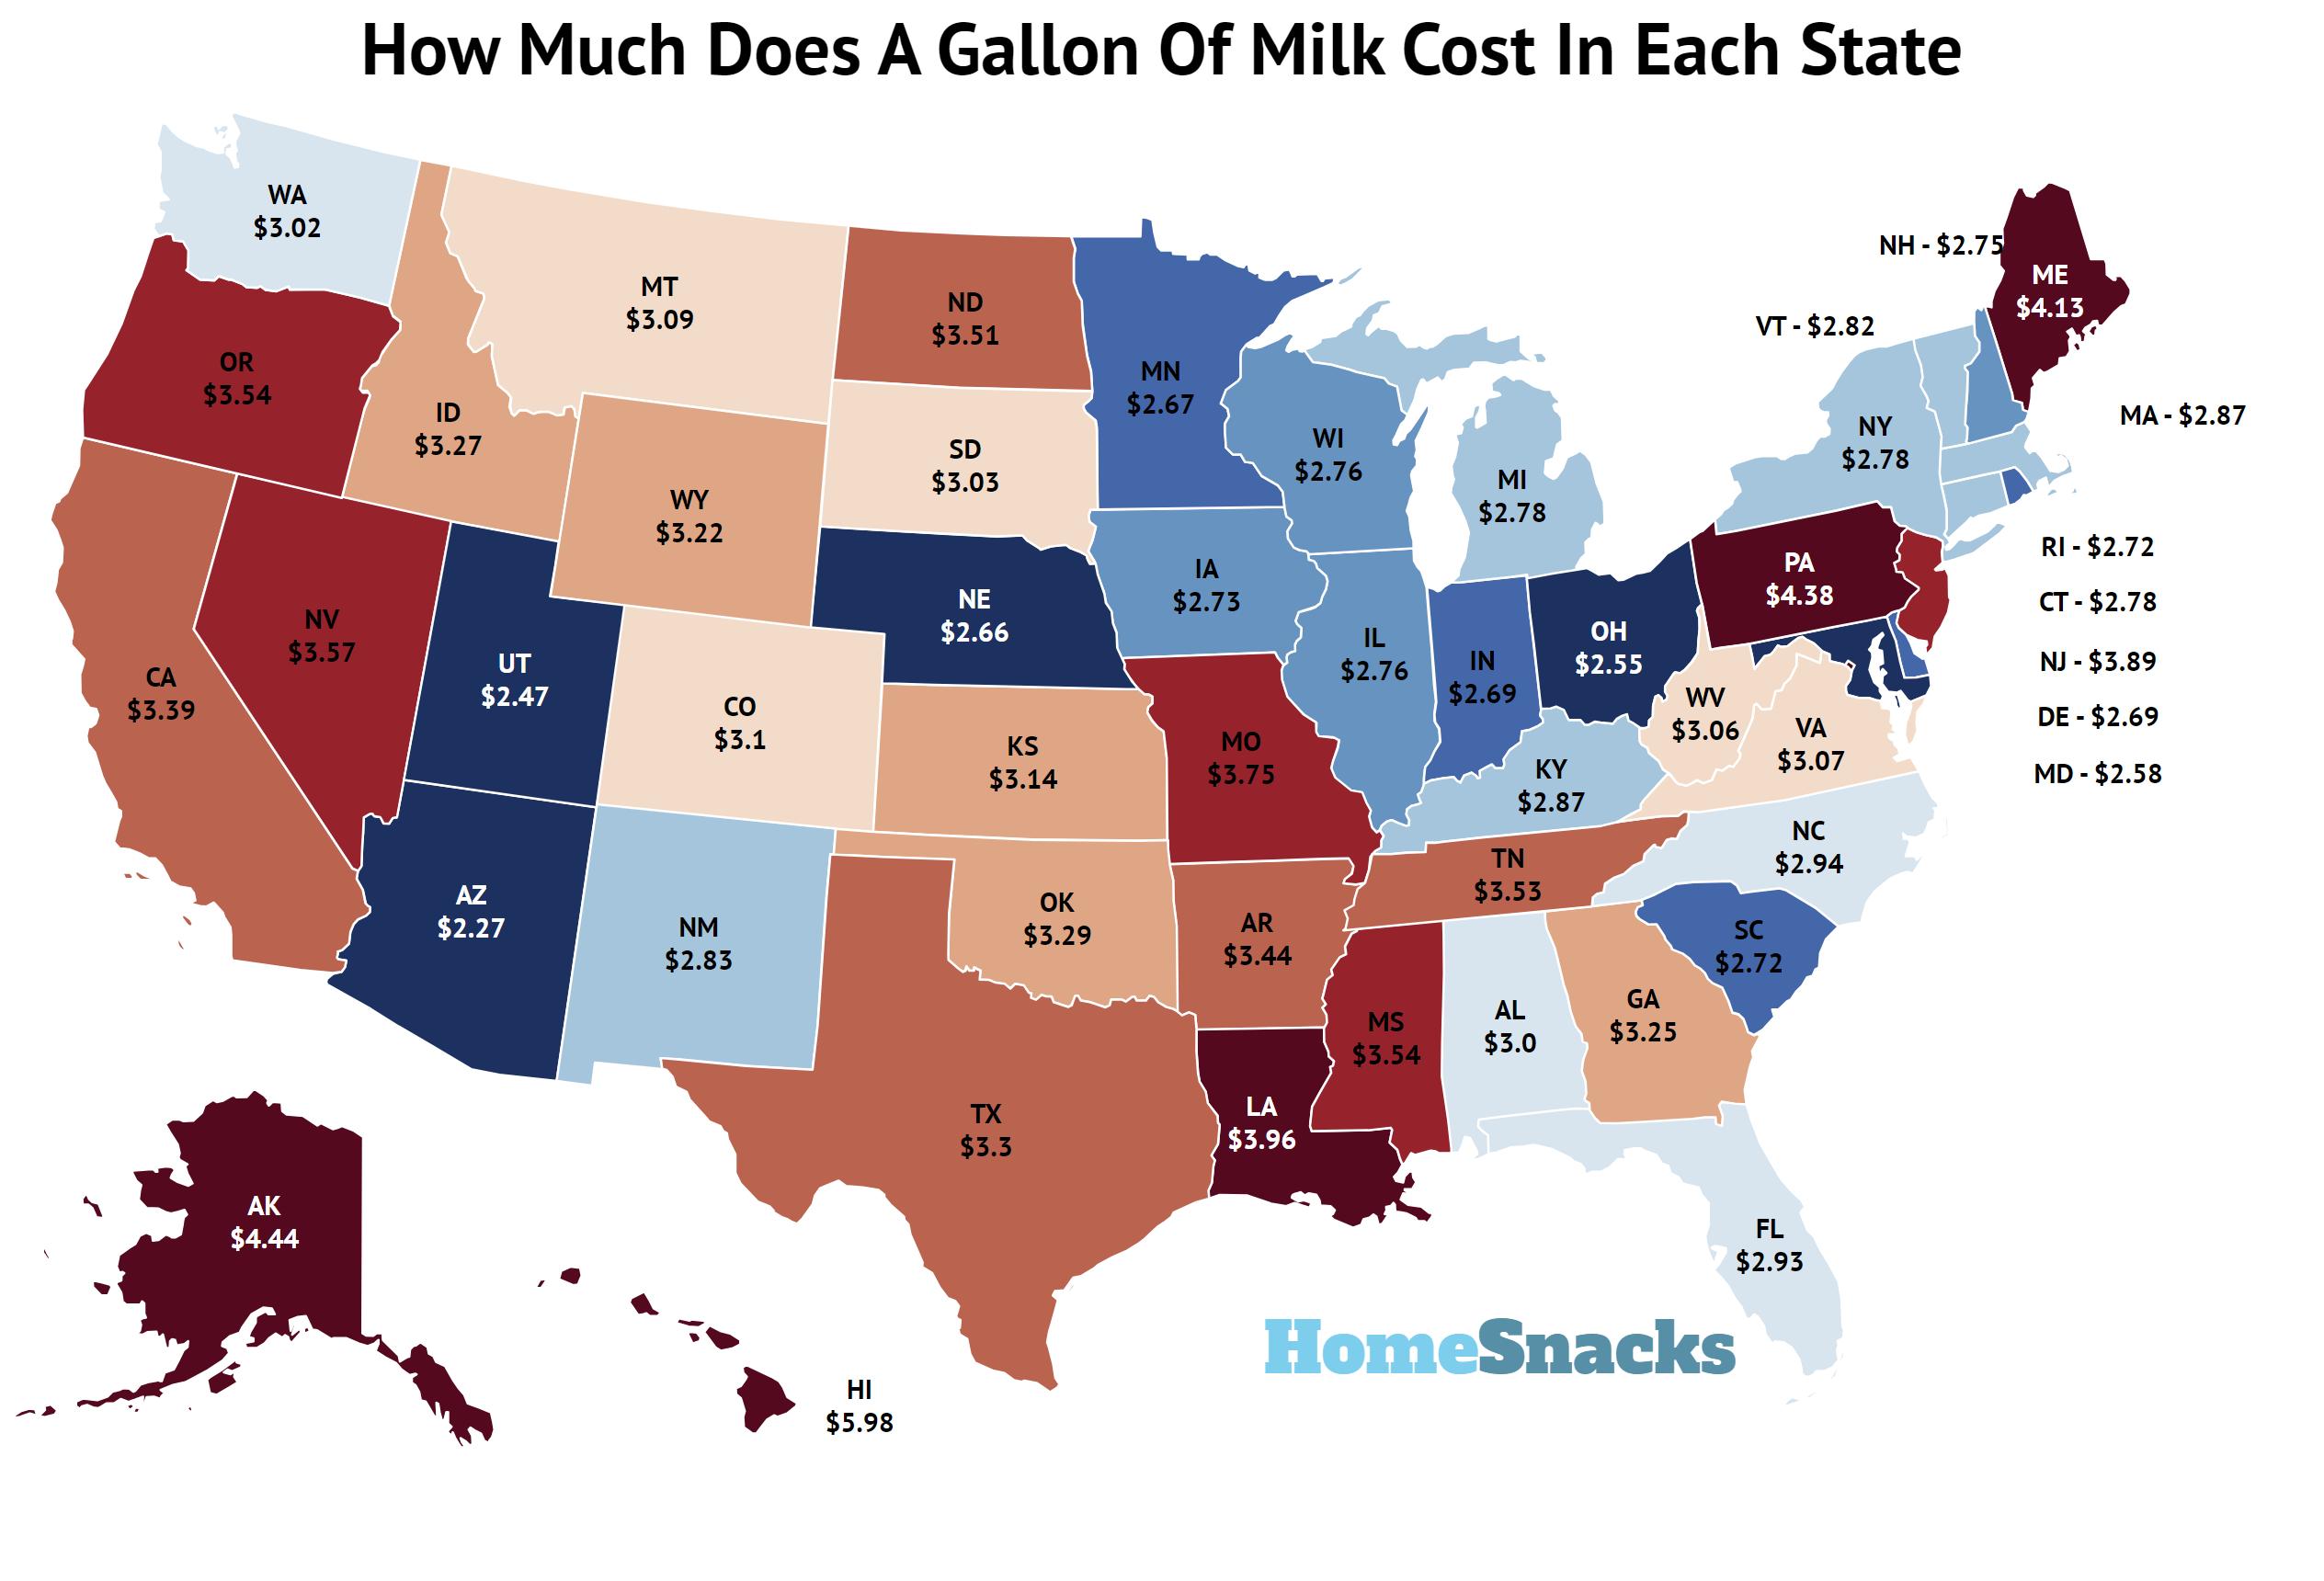 How Much Does A Gallon Of Milk Cost In Each State